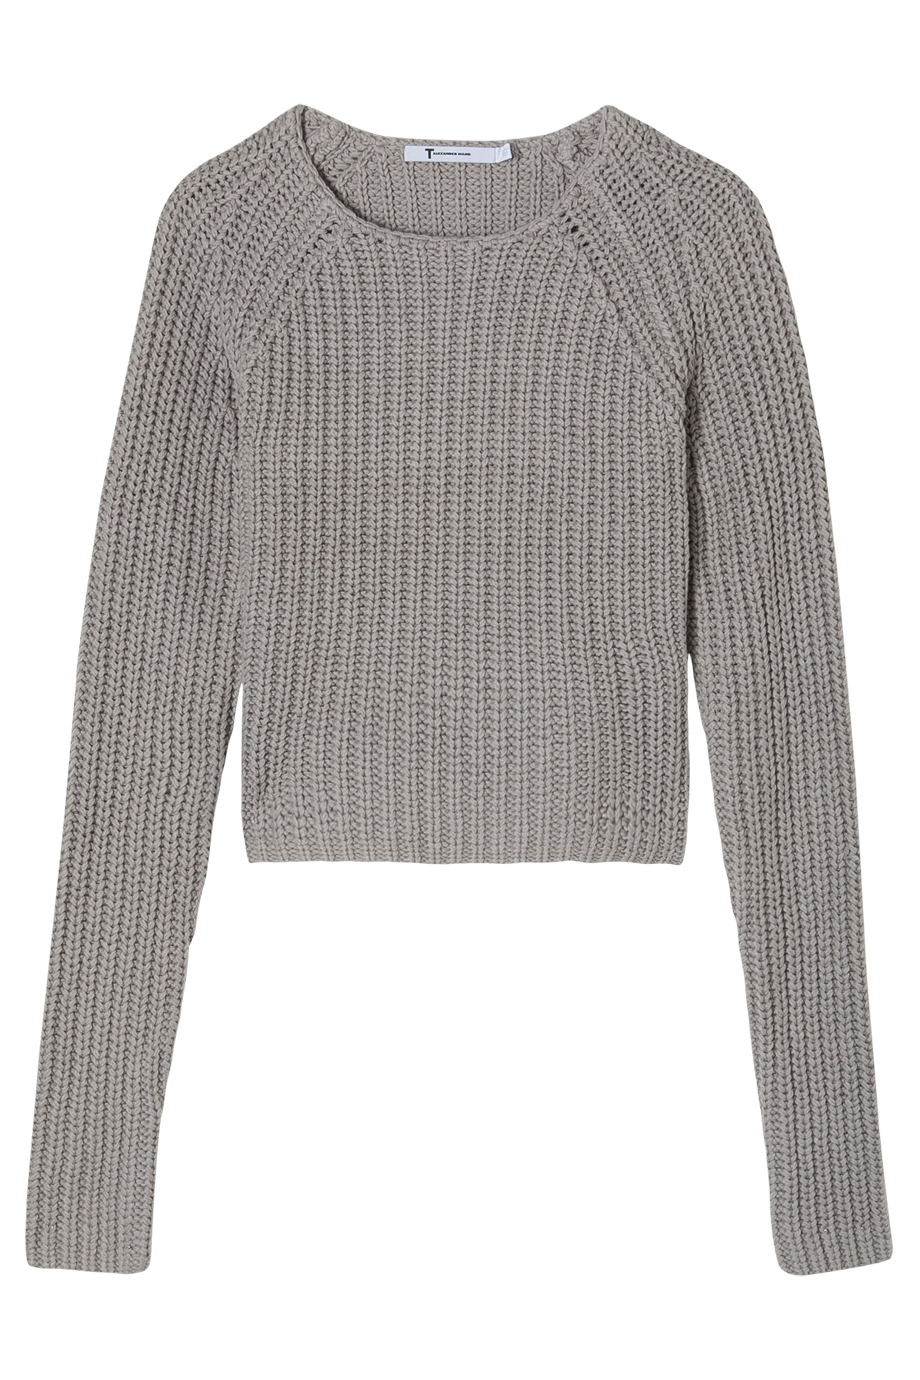 Lyst - T By Alexander Wang Crop Chunky Knit Jumper in Gray